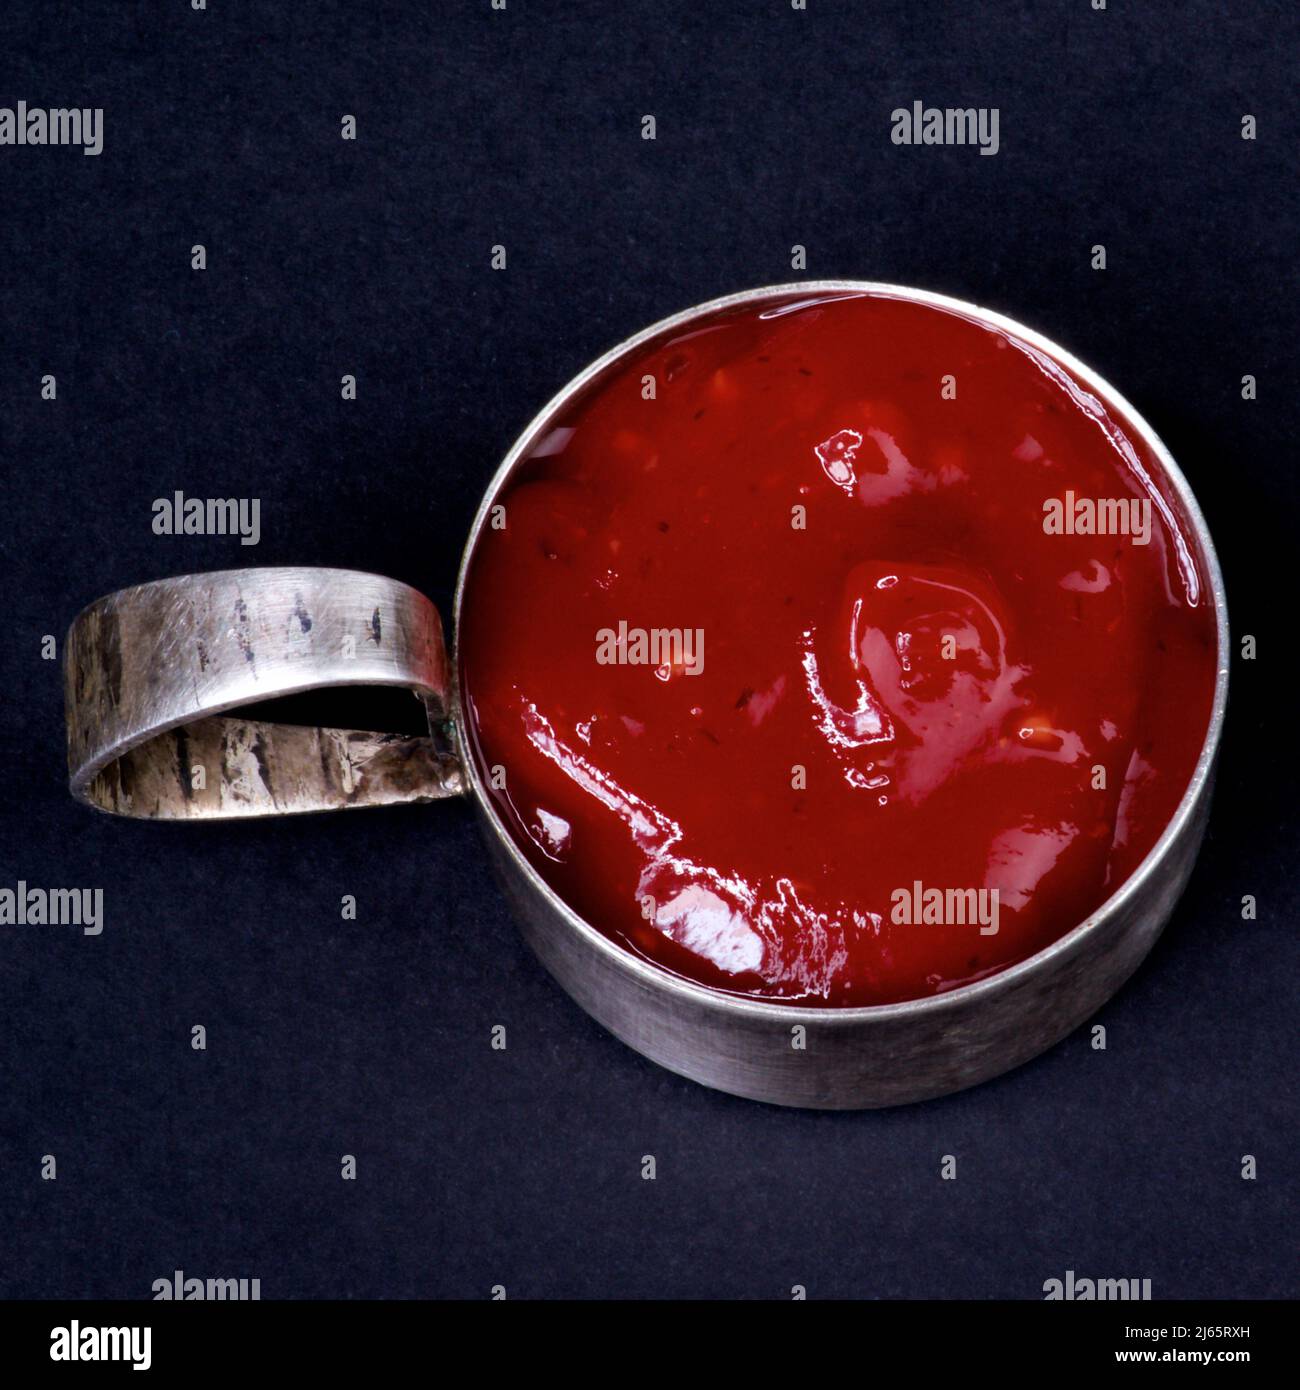 Homemade Tomato Ketchup in Vintage Tin Gravy Boat closeup on Black background Stock Photo